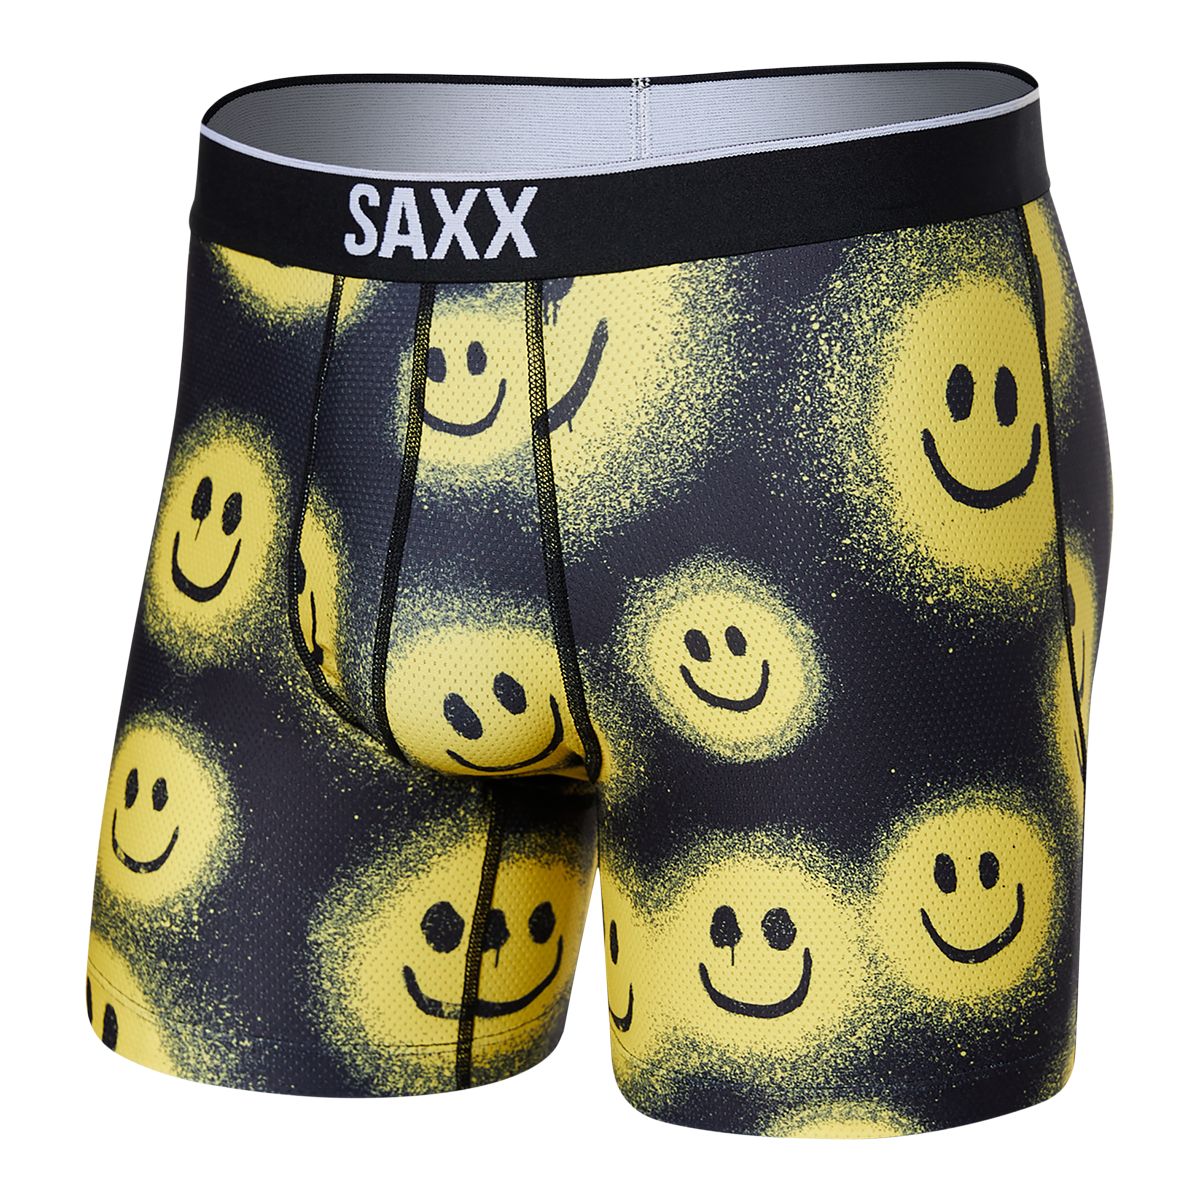 SAXX Ultra Men's Boxer Brief with Fly, Underwear, Breathable, Relaxed Fit